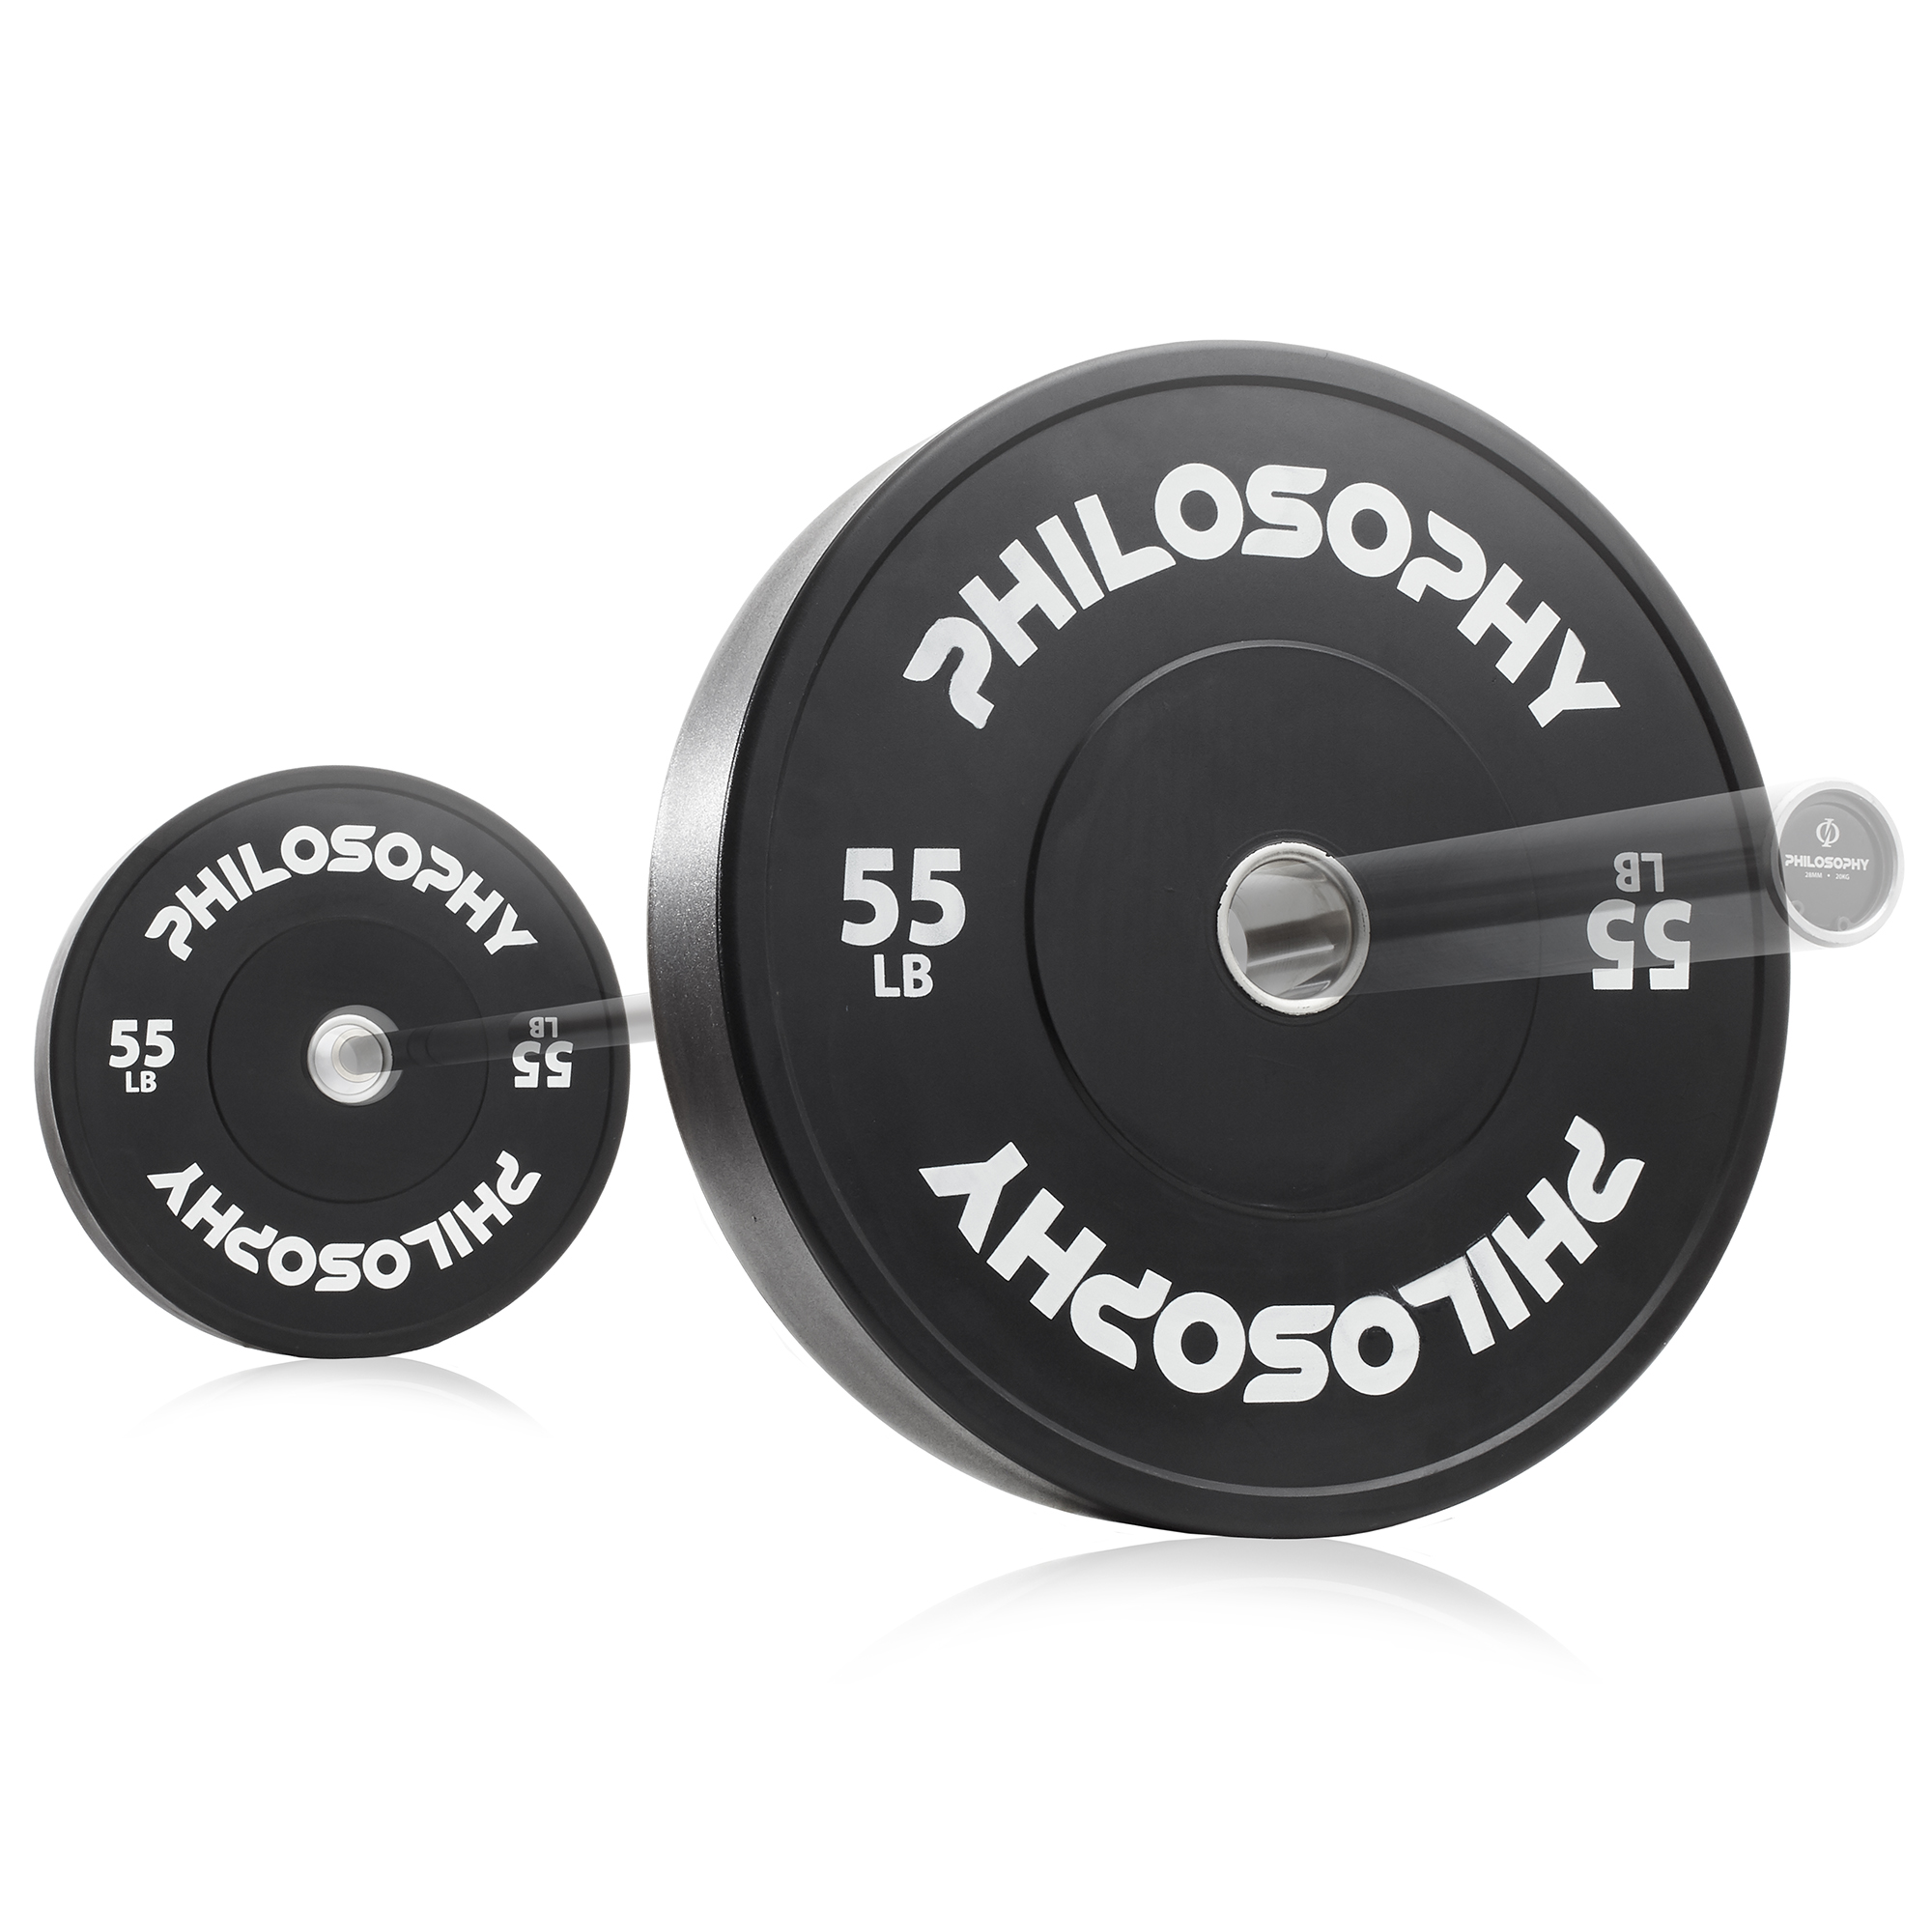 Philosophy Gym Set of 2 Olympic 2-Inch Rubber Bumper Plates (55 LB each) Black